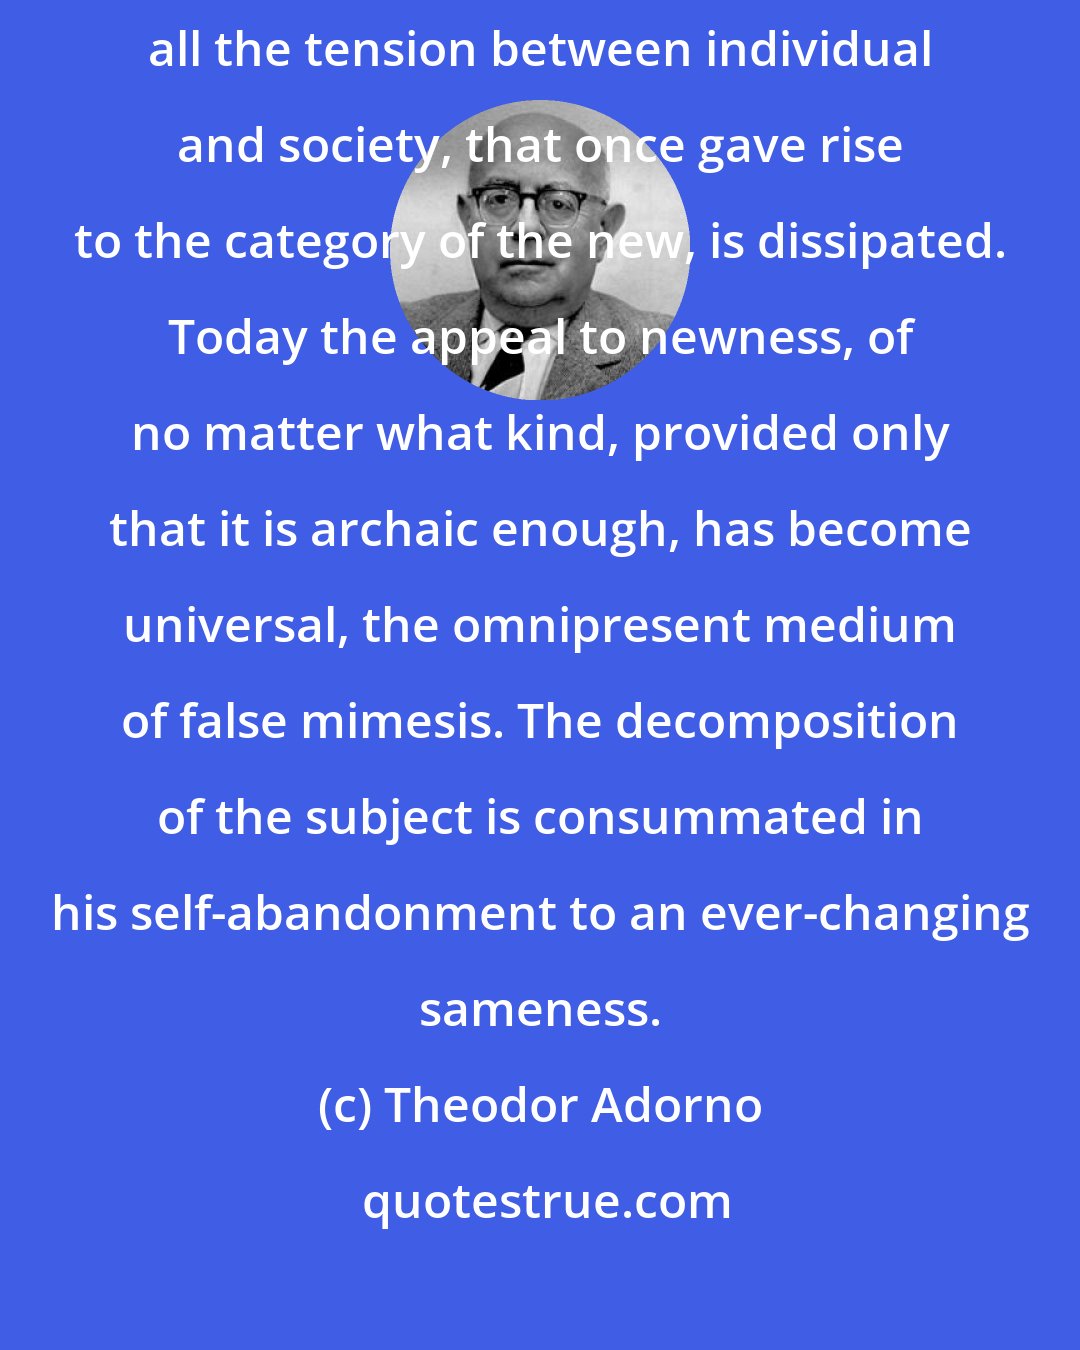 Theodor Adorno: Newness only becomes mere evil in its totalitarian format, where all the tension between individual and society, that once gave rise to the category of the new, is dissipated. Today the appeal to newness, of no matter what kind, provided only that it is archaic enough, has become universal, the omnipresent medium of false mimesis. The decomposition of the subject is consummated in his self-abandonment to an ever-changing sameness.